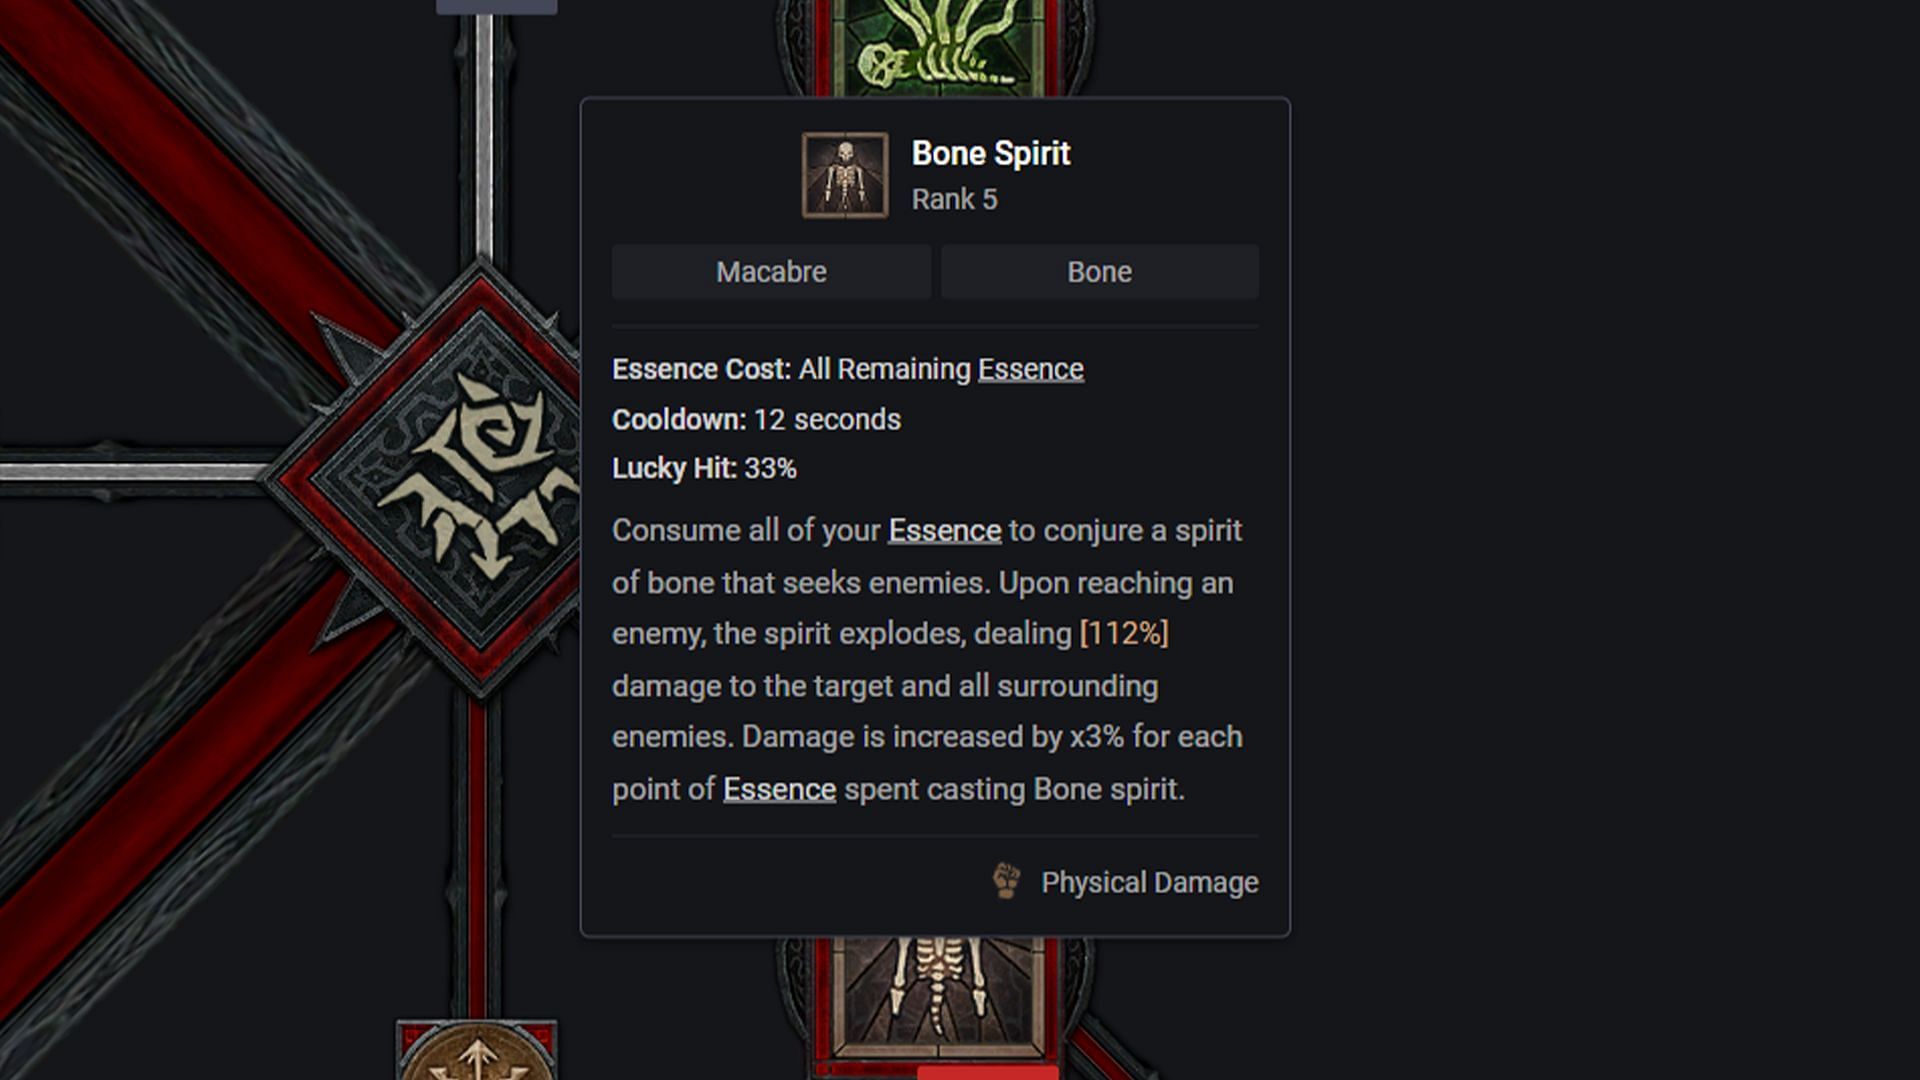 Bone Spirit is the prime skill for this build in Diablo 4 (Image via D4builds.gg)